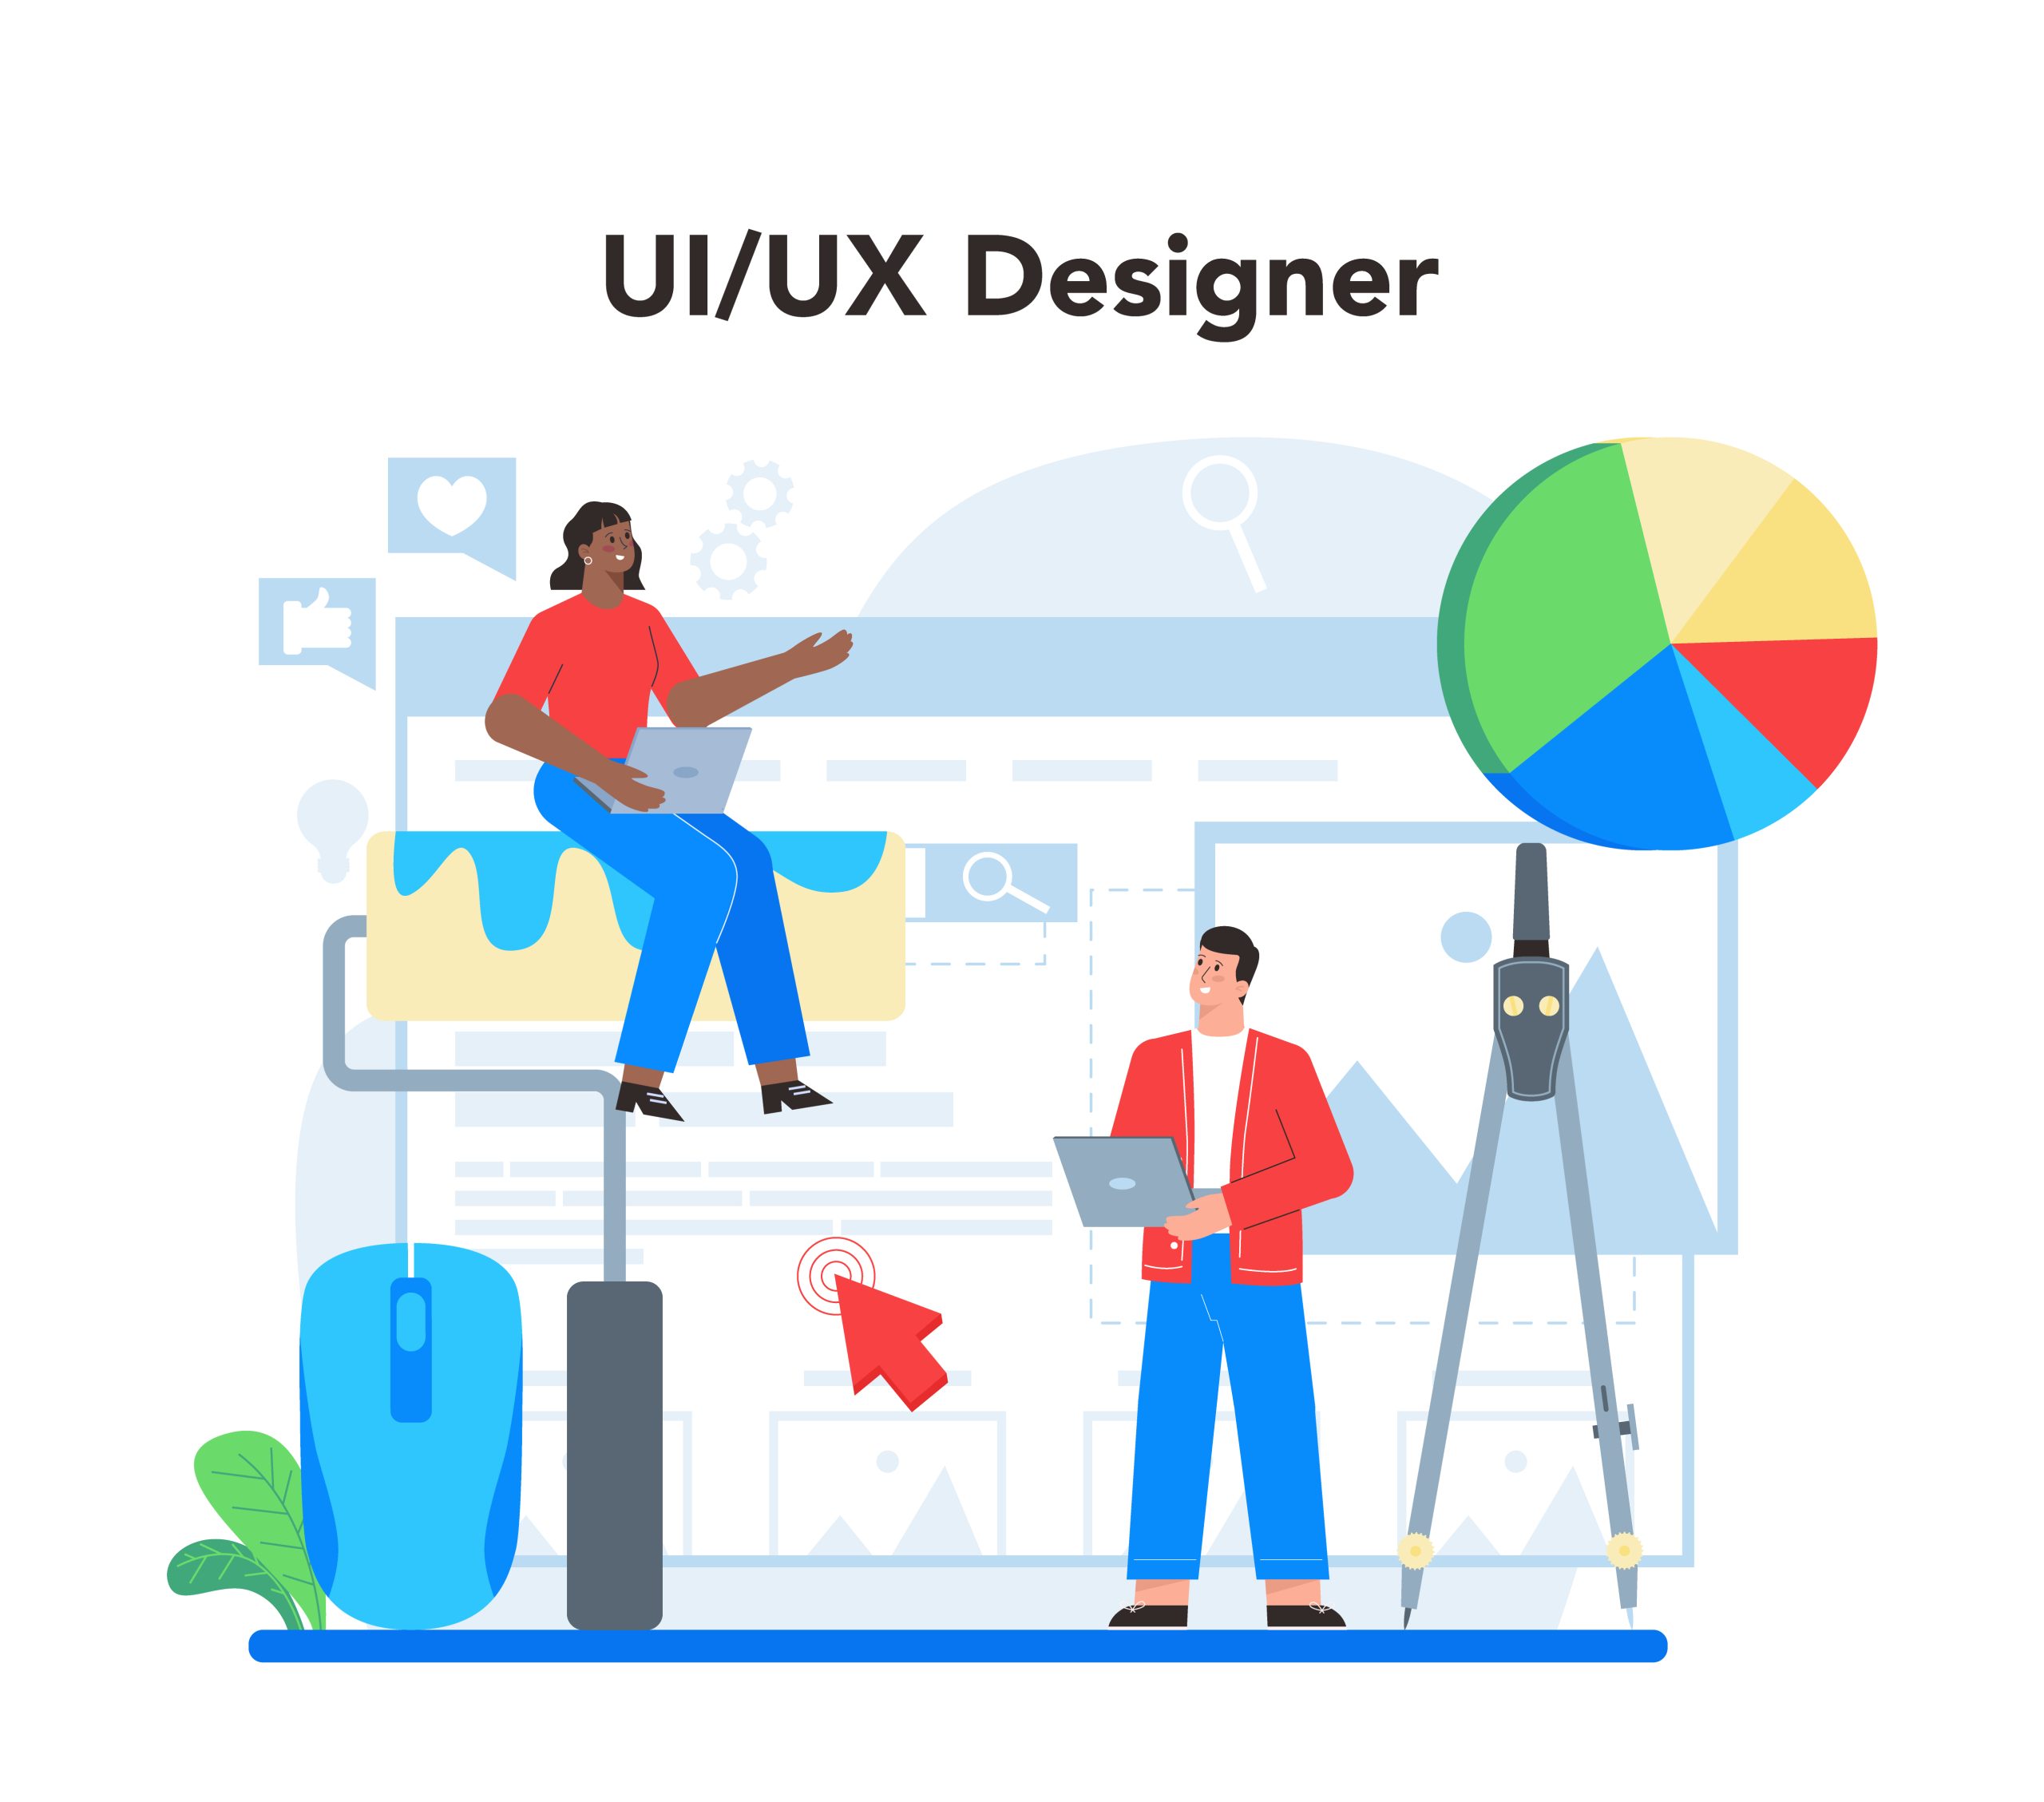 How To Pick A UI UX Design Firm For Your Upcoming Startup App Design - Blogiefy